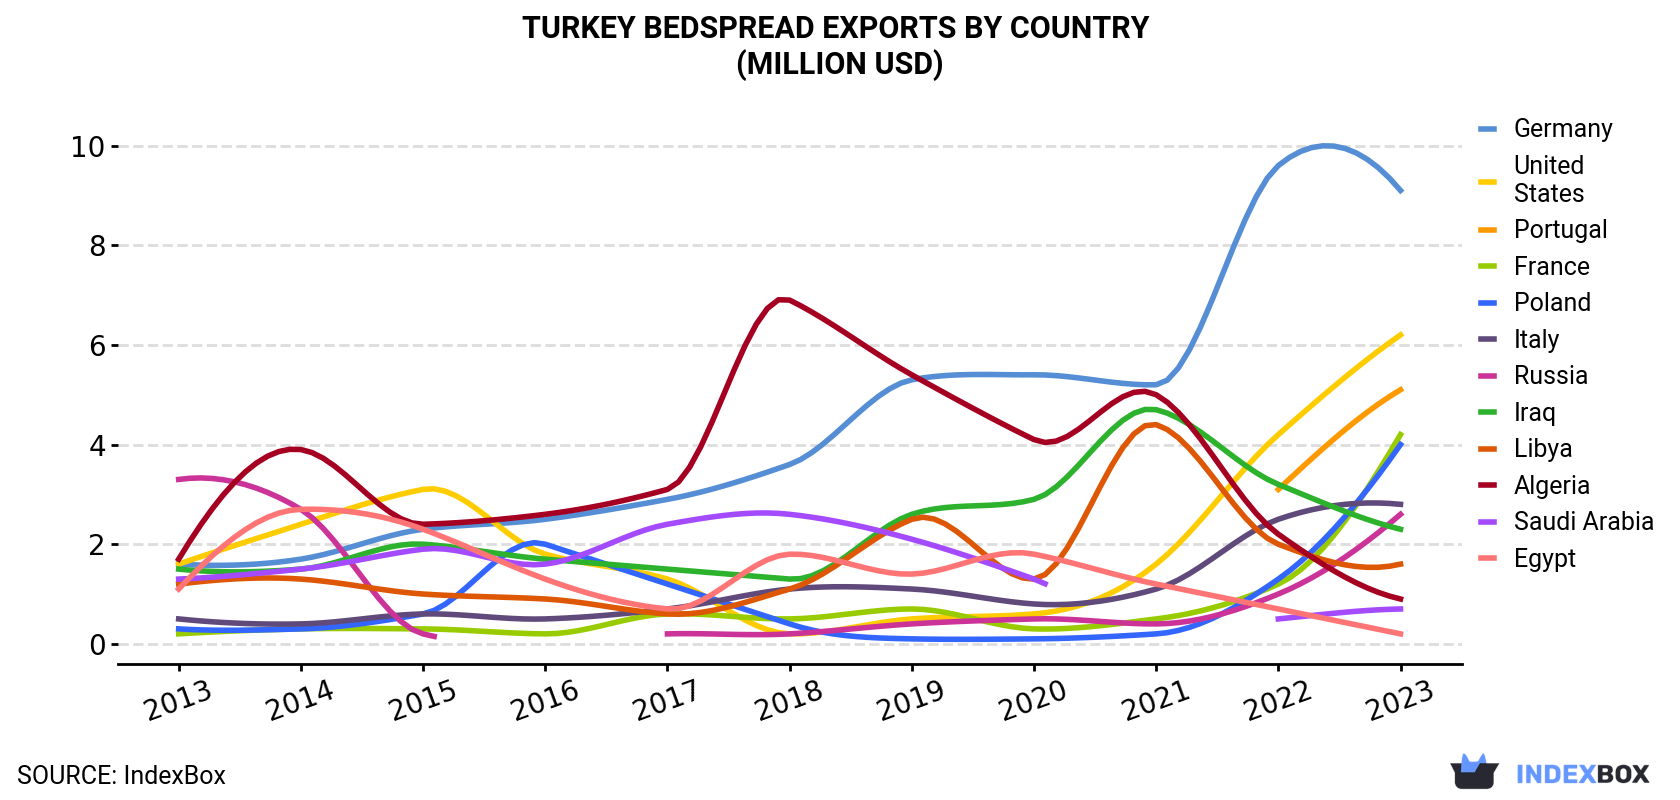 Turkey Bedspread Exports By Country (Million USD)